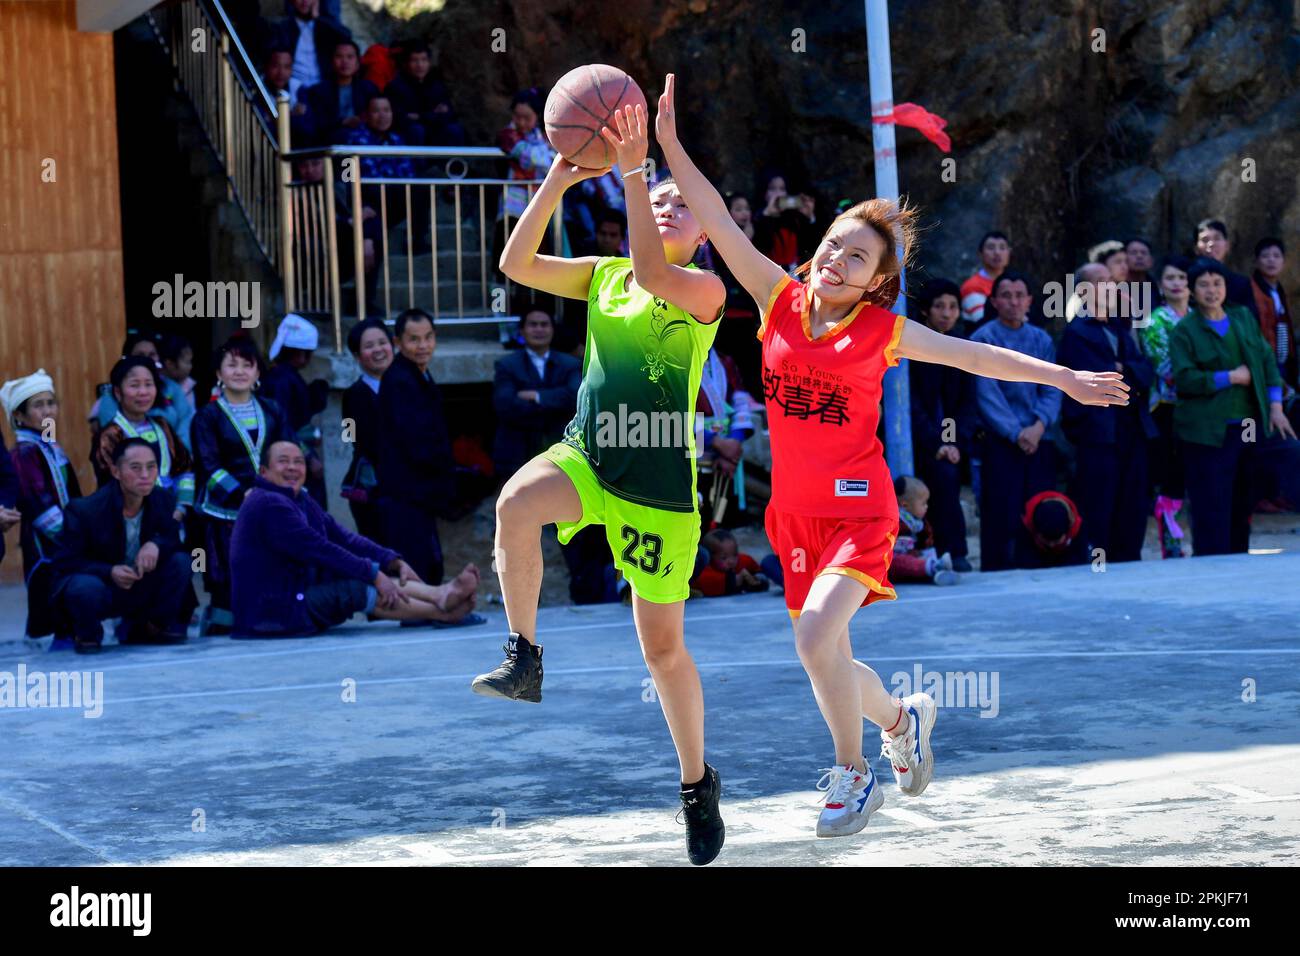 (230408) -- NANNING, April 8, 2023 (Xinhua) -- Villagers play basketball to celebrate the Spring Festival in Wuying village of Rongshui Miao Autonomous Prefecture, south China's Guangxi Zhuang Autonomous Region, Feb. 6, 2019. Basketball has long been popular in Wuying Village. In the past, the villagers played on a dirt court. The local government has been upgrading the infrastruture in recent years, including building a new basketball court of concrete. Now the sport becomes even more popular among the villagers, especially the kids. The village organizes basketball matches to celebrate festi Stock Photo